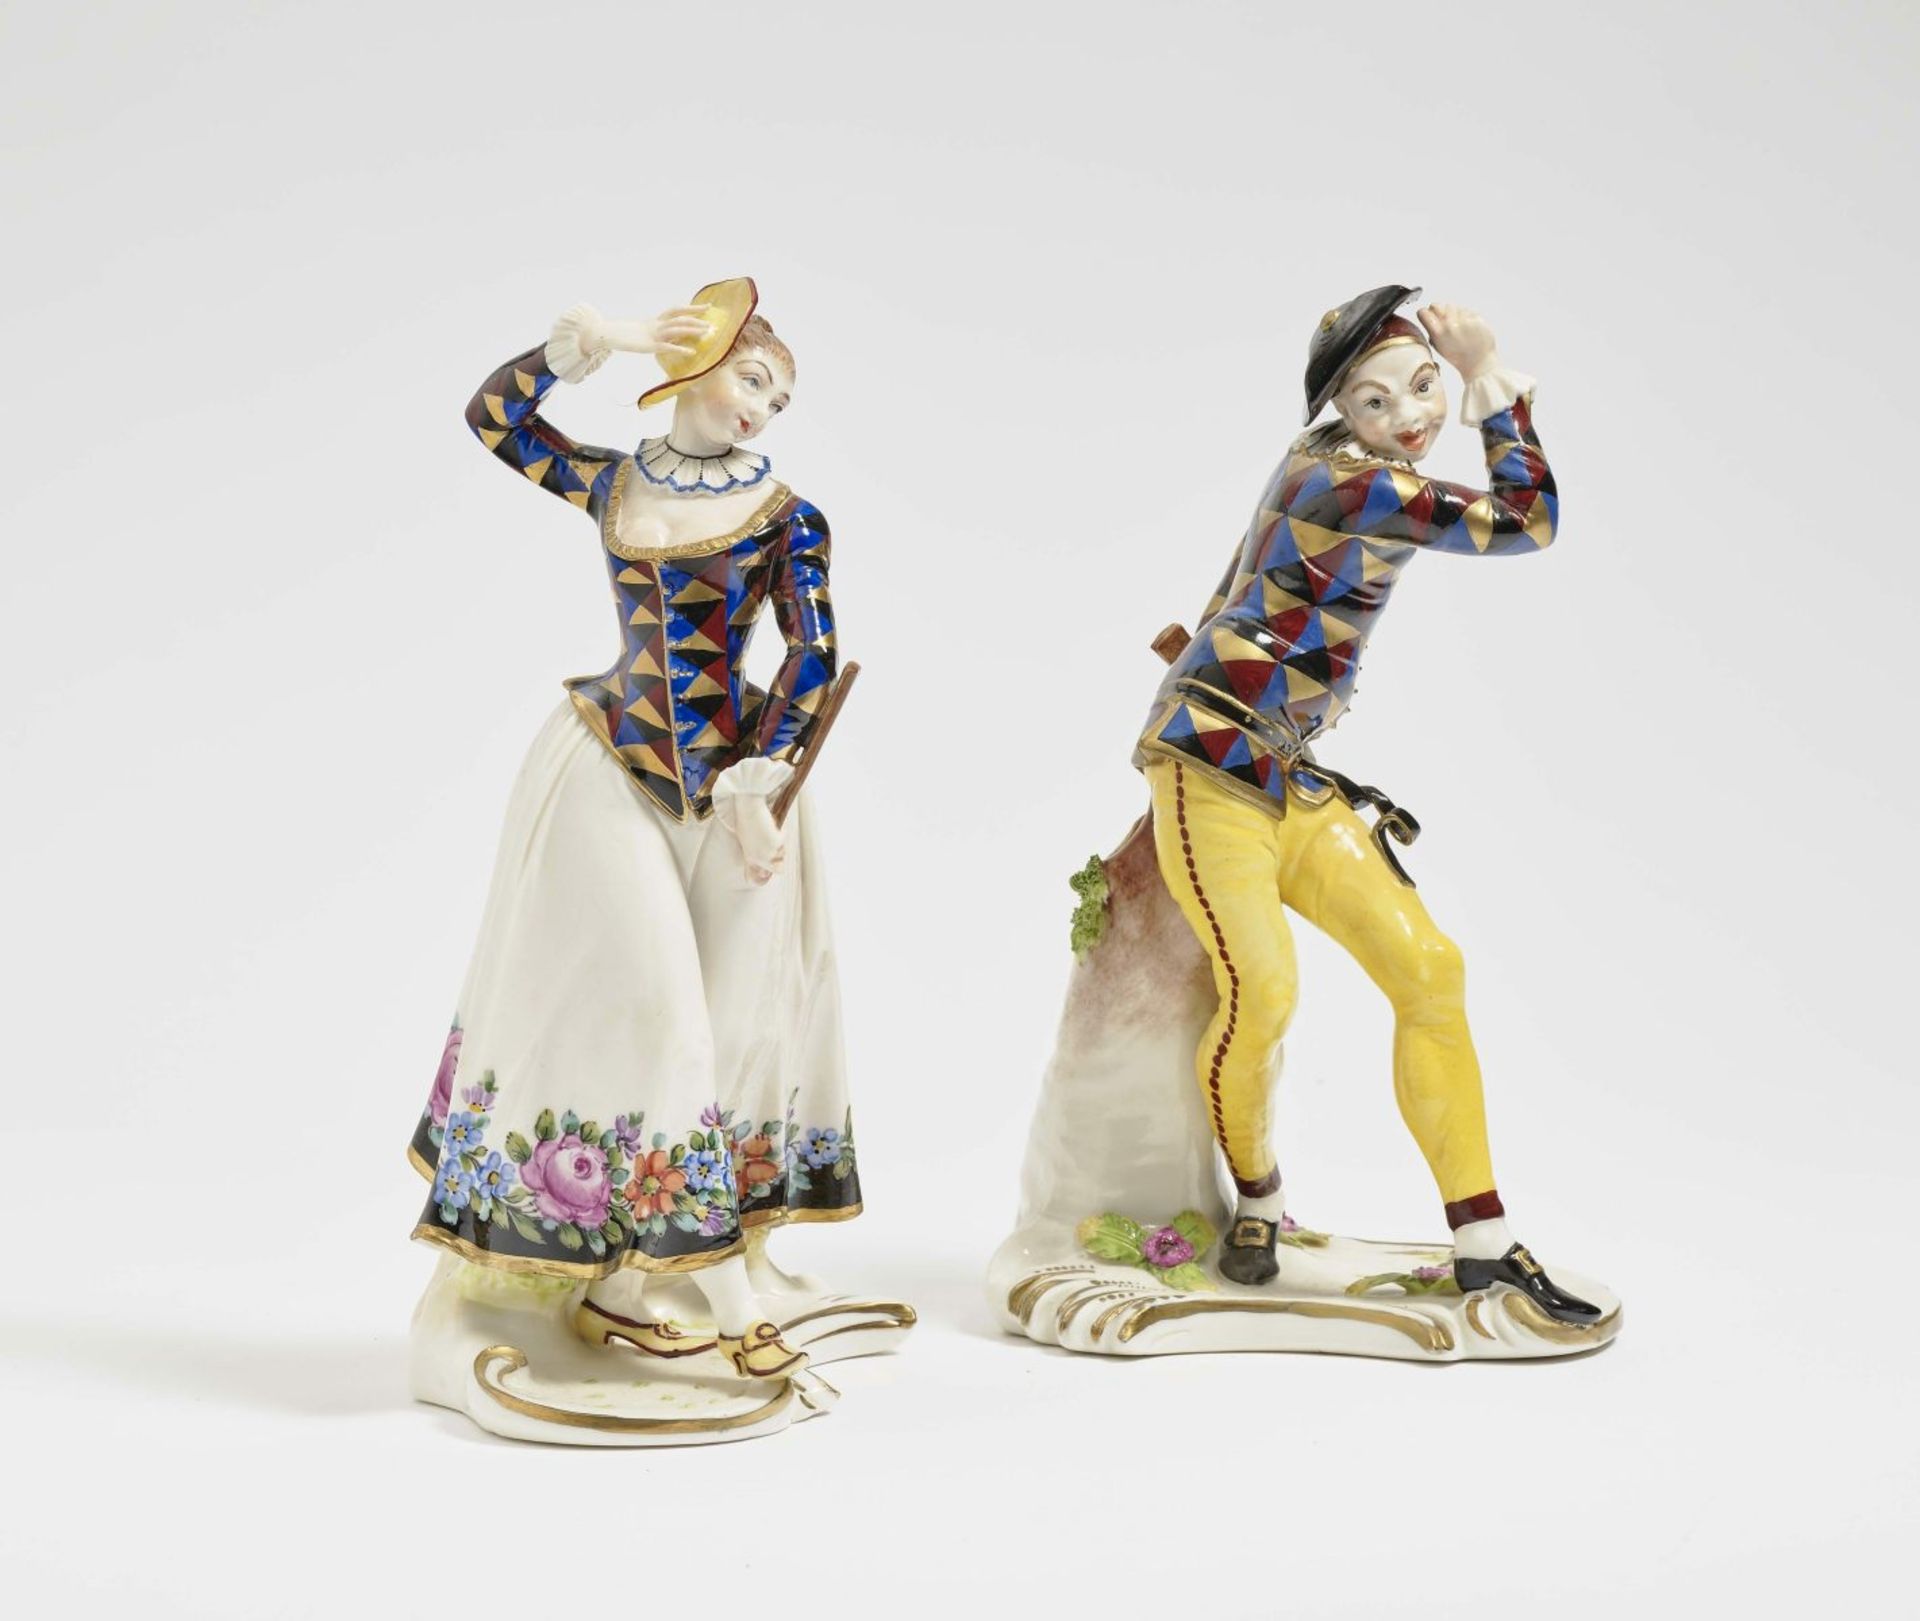 Arlequin and ArlequinaNymphenburg, model by F. A. Bustelli Porcelain, polychrome and gold